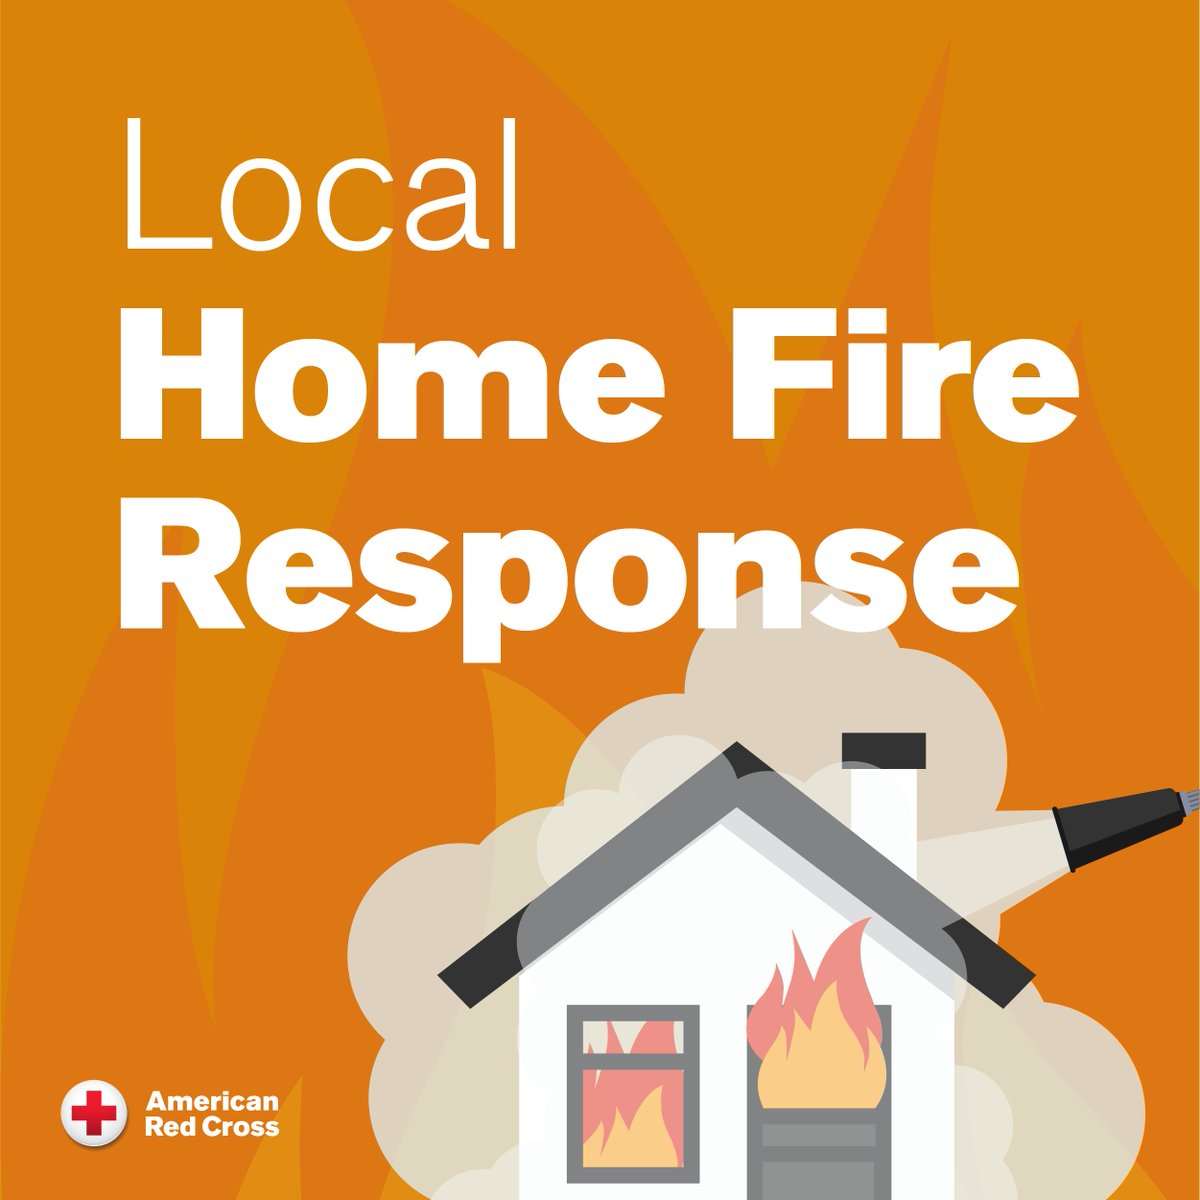 We are assisting a family of 3 after a home fire along Beham Ridge Road in #WashingtonCounty. We provided them with financial assistance, comfort kits (which contain the basic personal supplies needed in the aftermath of a disaster), blankets and water. #EndHomeFires